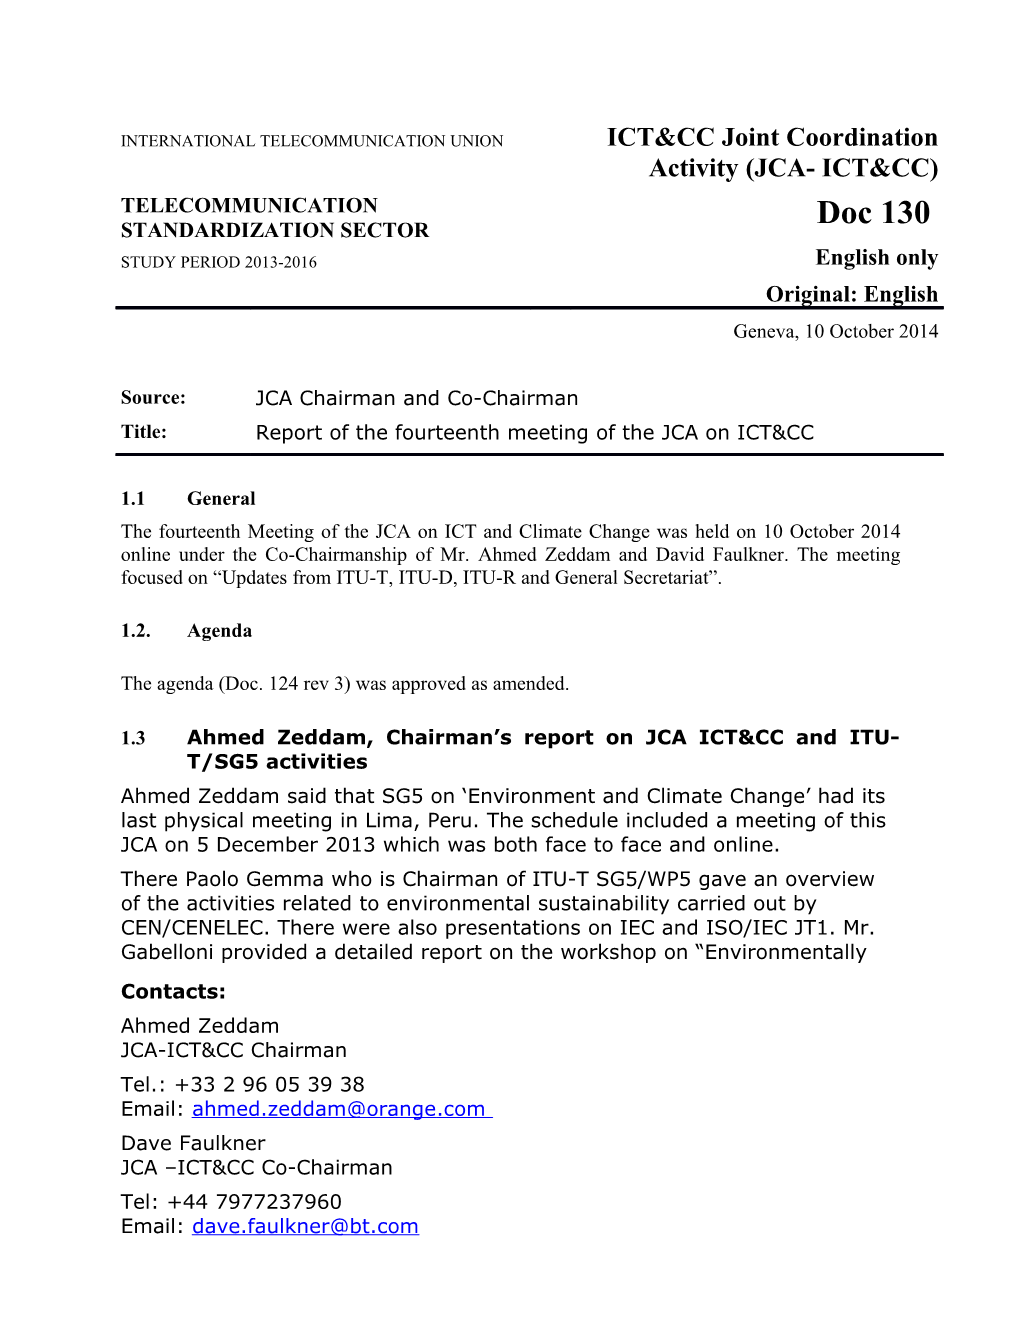 The Agenda (Doc. 124 Rev 3) Was Approved As Amended